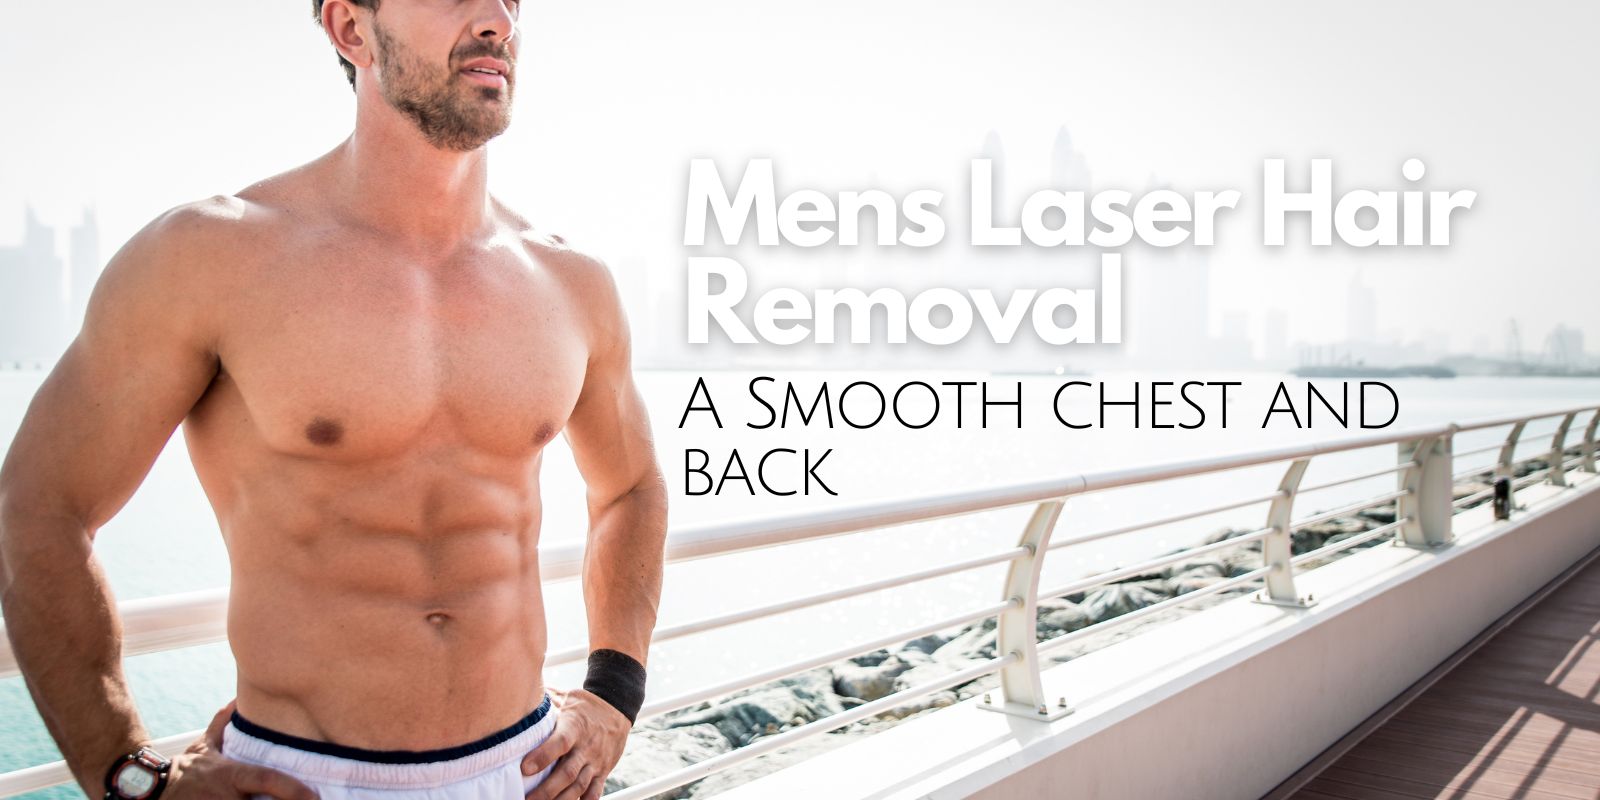 best mens laser hair removal Victoria BC. Hair free chest and back